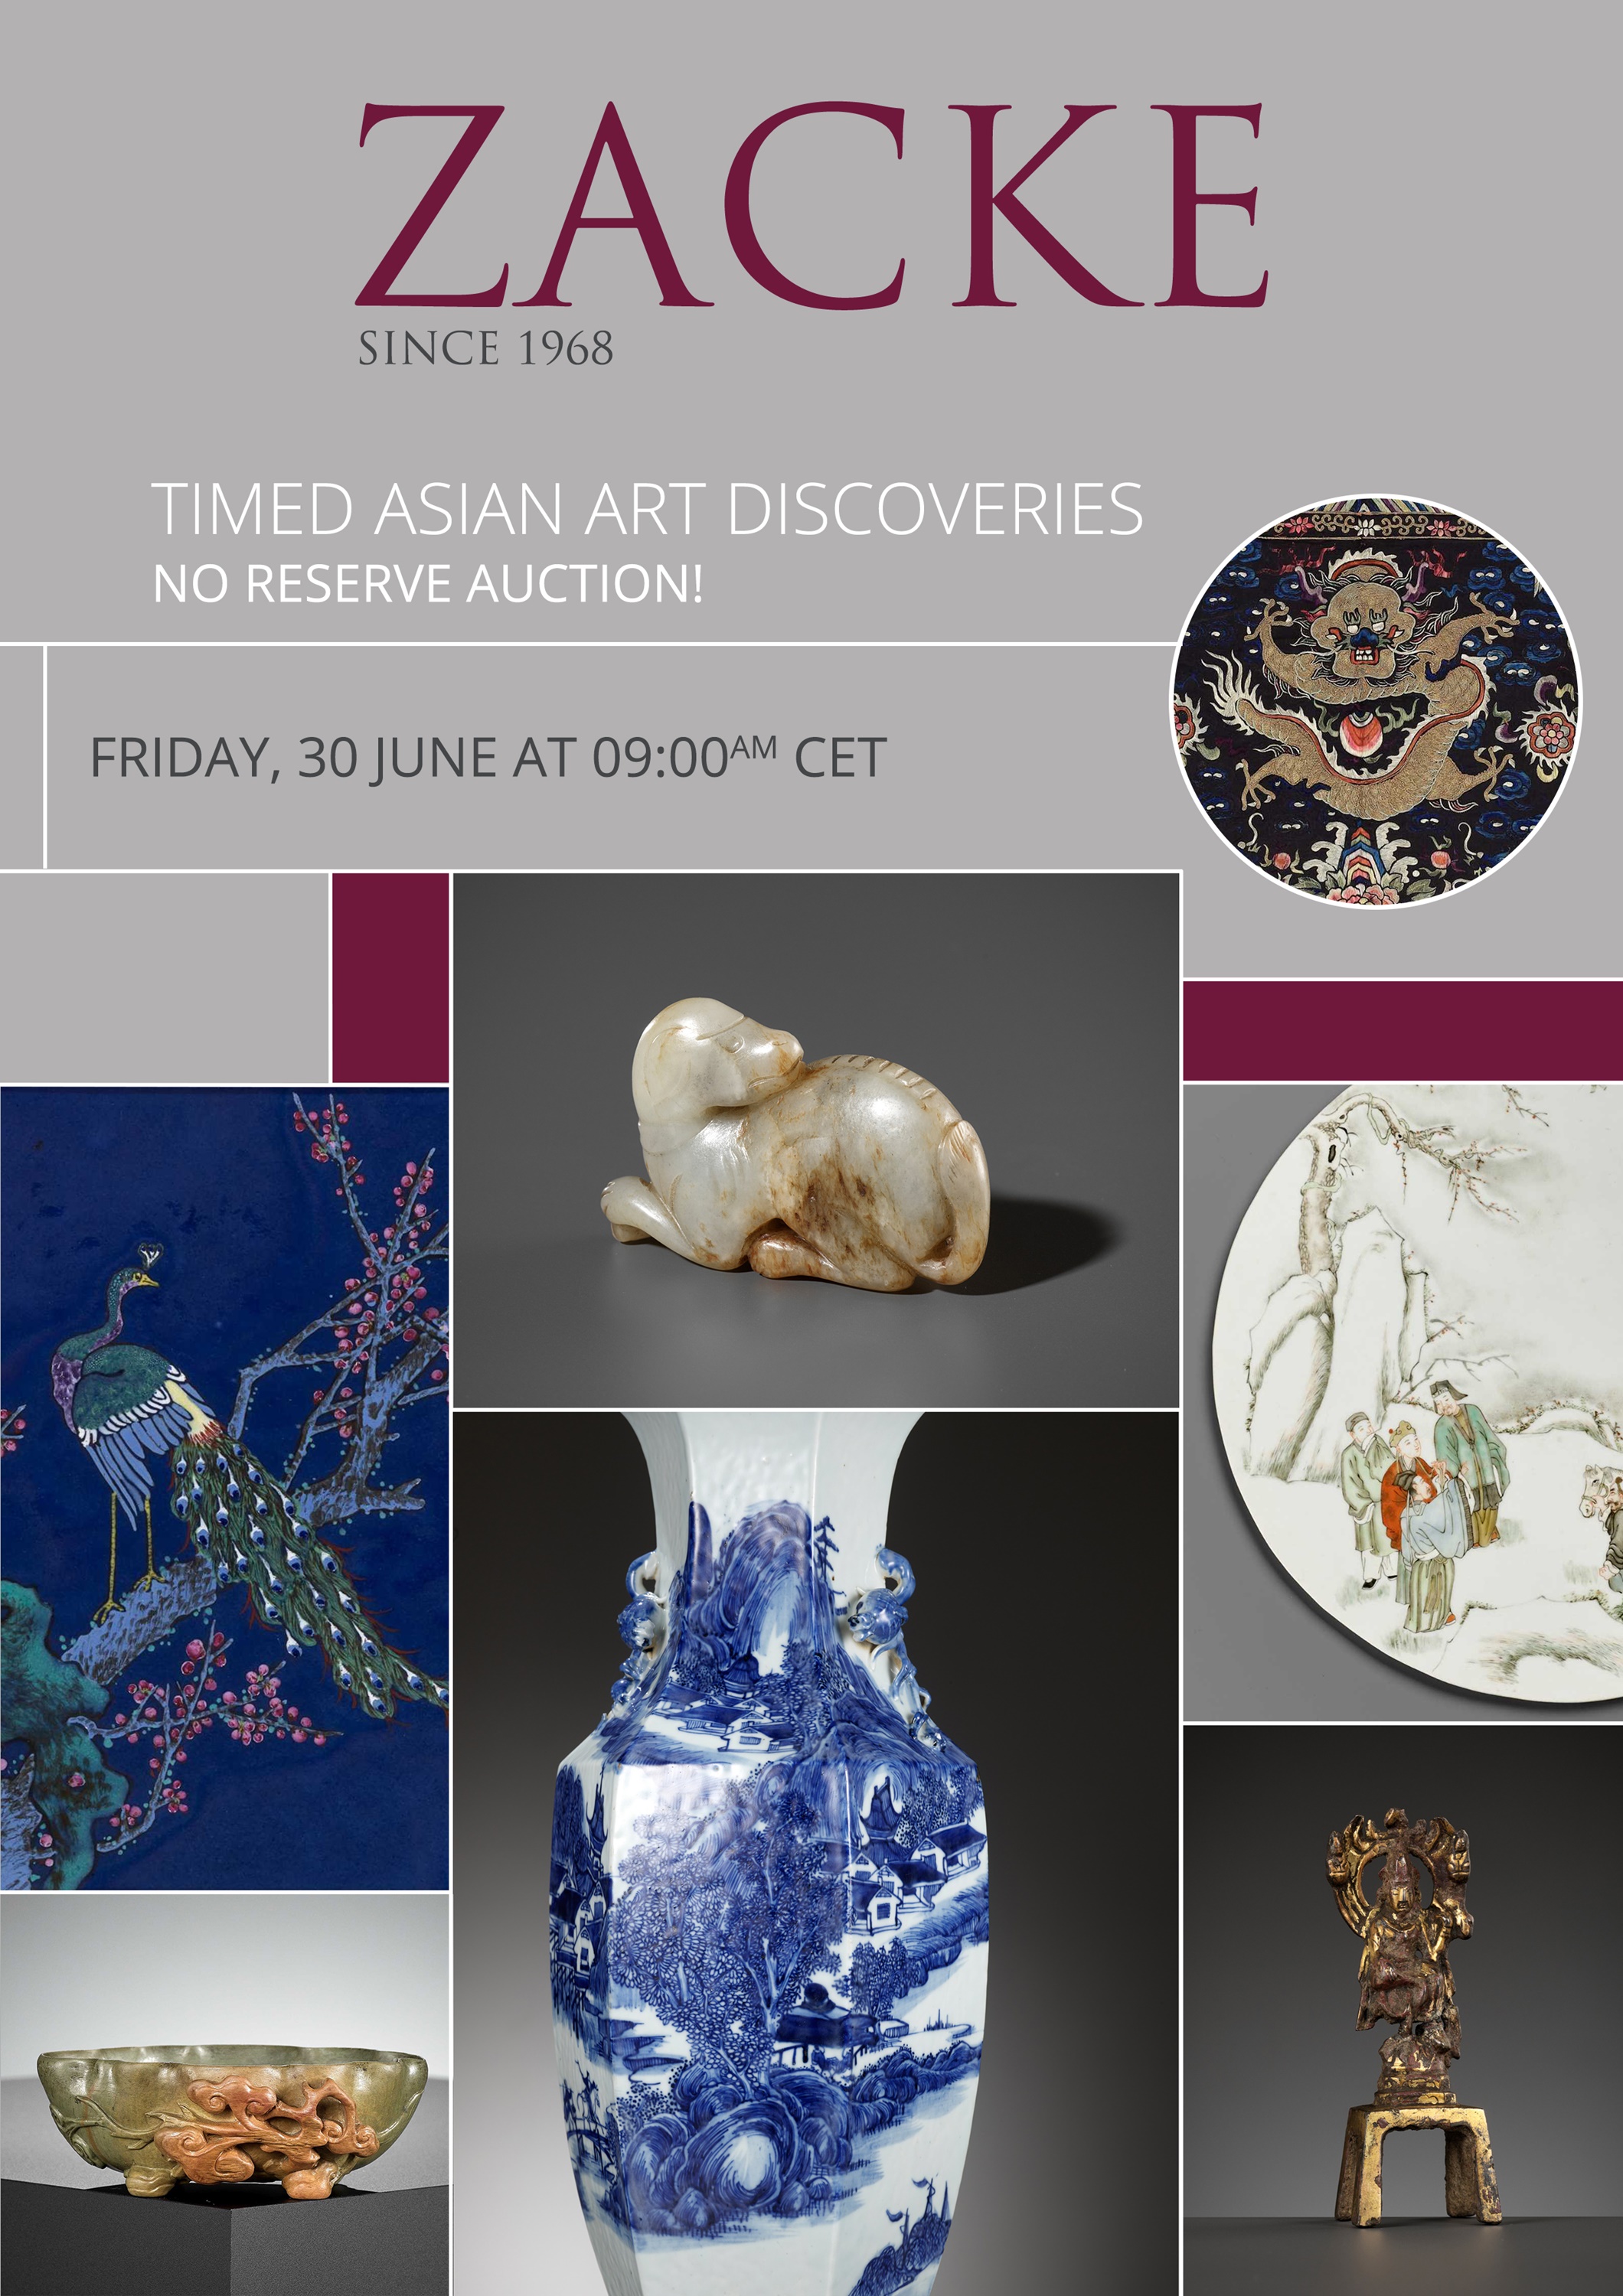 Timed Asian Art Discoveries - No Reserve Auction!